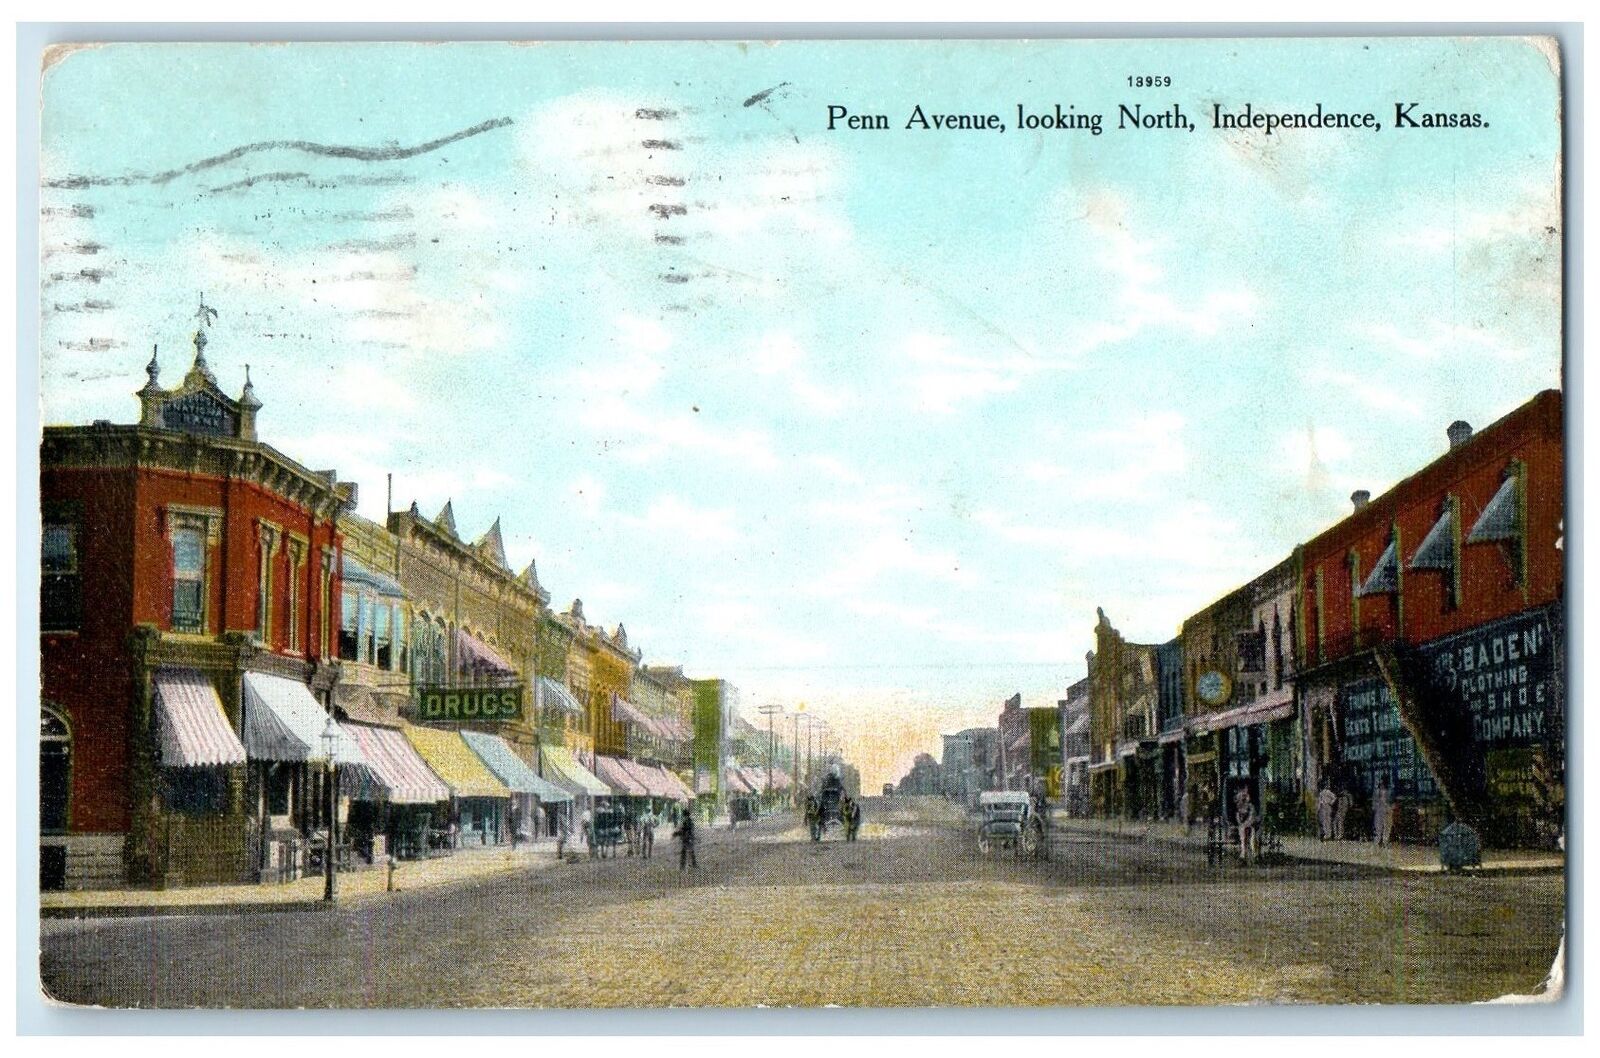 1909 Penn Avenue Looking North Classic Car Carriage Independence Kansas Postcard